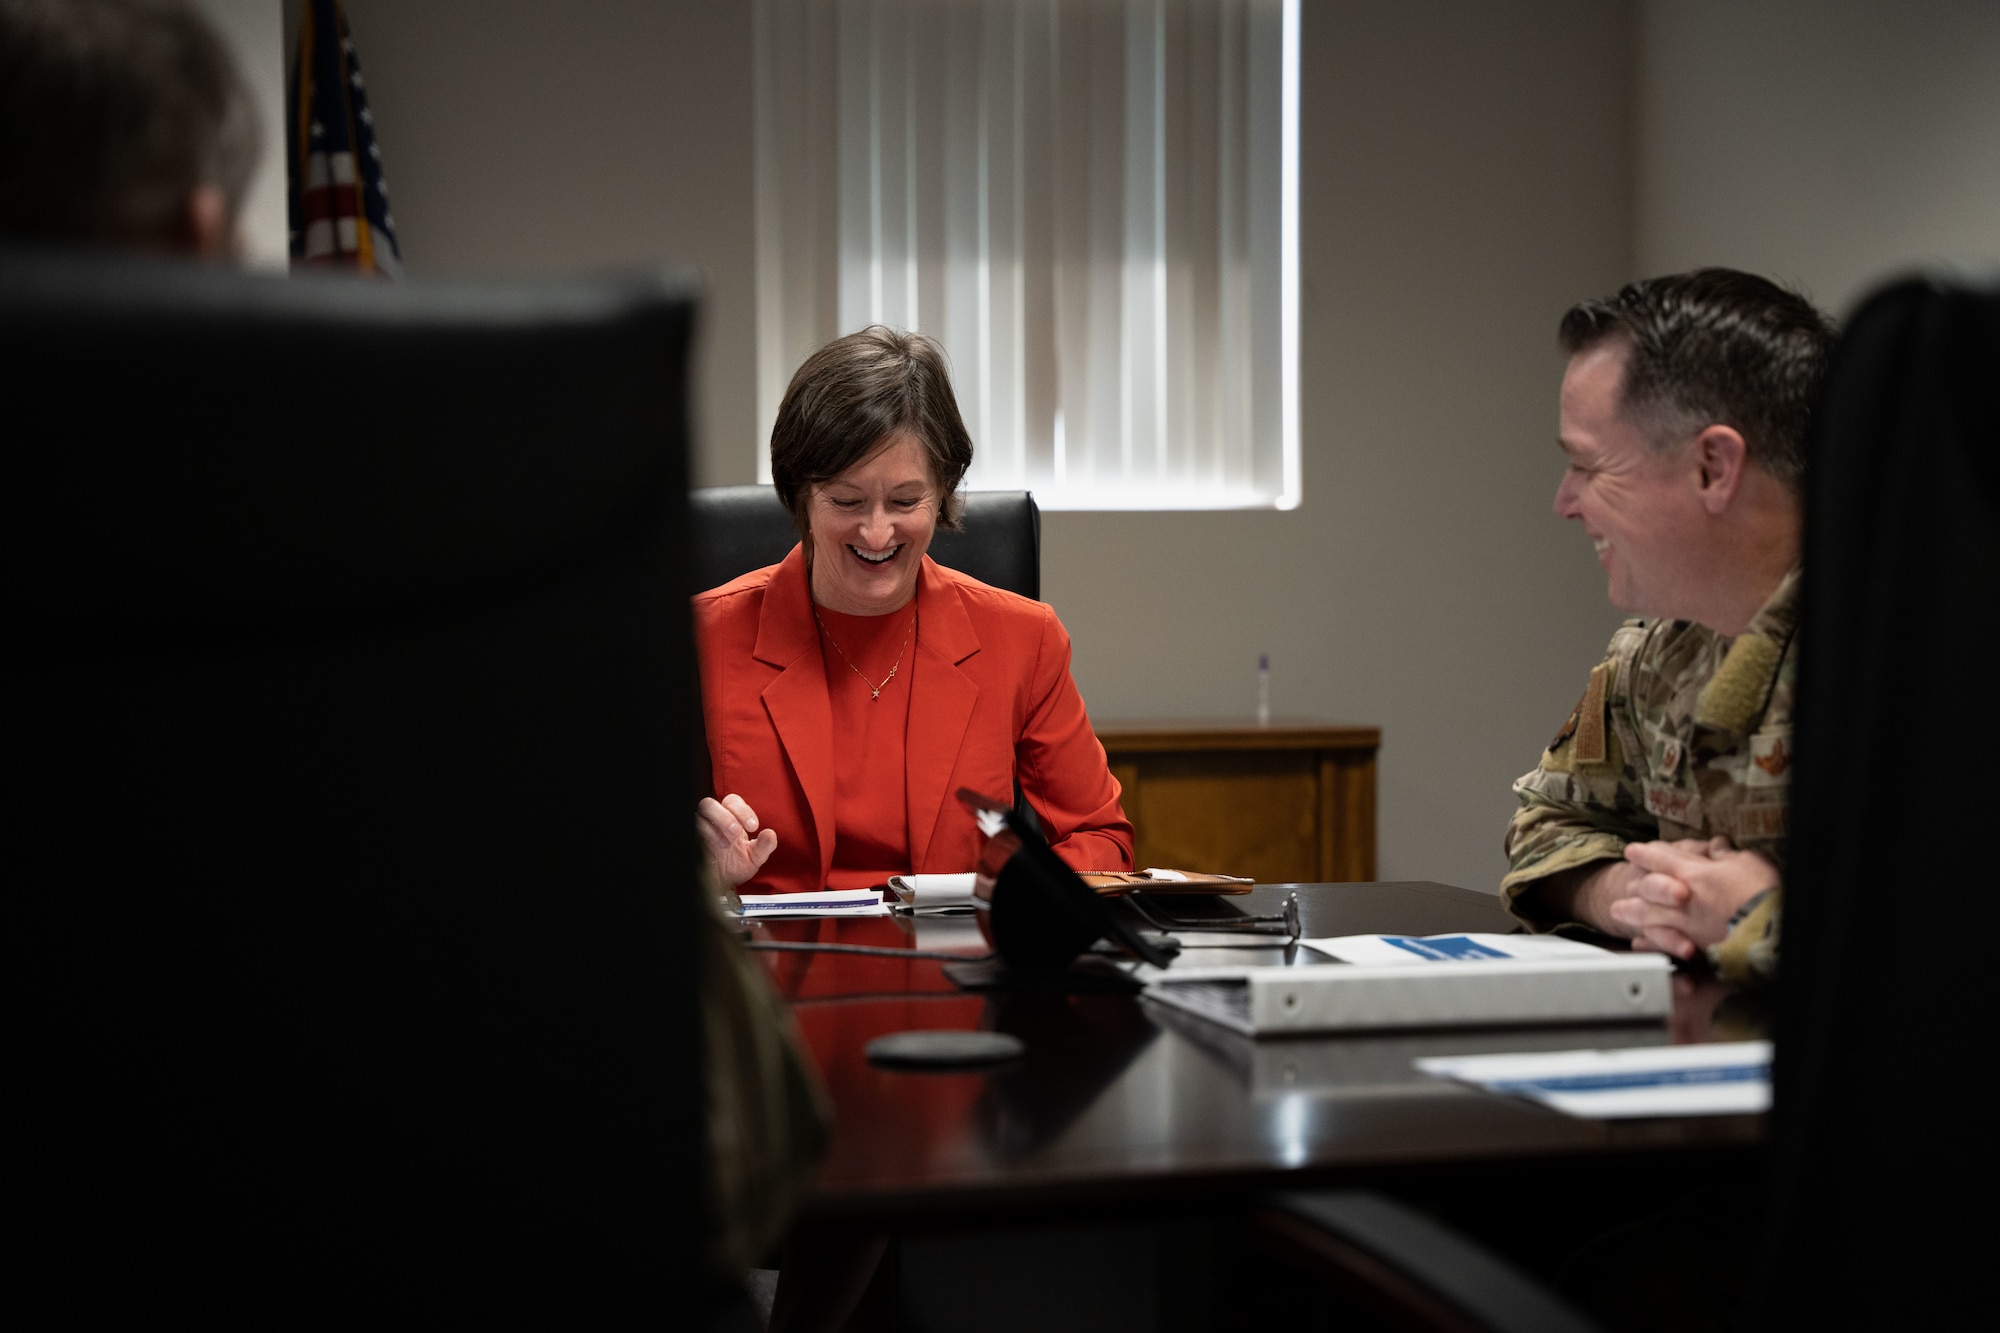 Susan Veazey, Regional Director of the Department of Defense’s Office of Local Defense Community Cooperation, speaks with U.S. Air Force Col. Jeremy S. Bergin, 27th Special Operations Wing commander, during the 27 SOW leadership meeting at Cannon Air Force Base, N.M., April 24, 2024. OLDCC provides grant funding that enhances installation resilience while also enabling civilian responses to local impacts to state and local governments to help communities support the military mission. (U.S. Air Force photo by Senior Airman Parra)